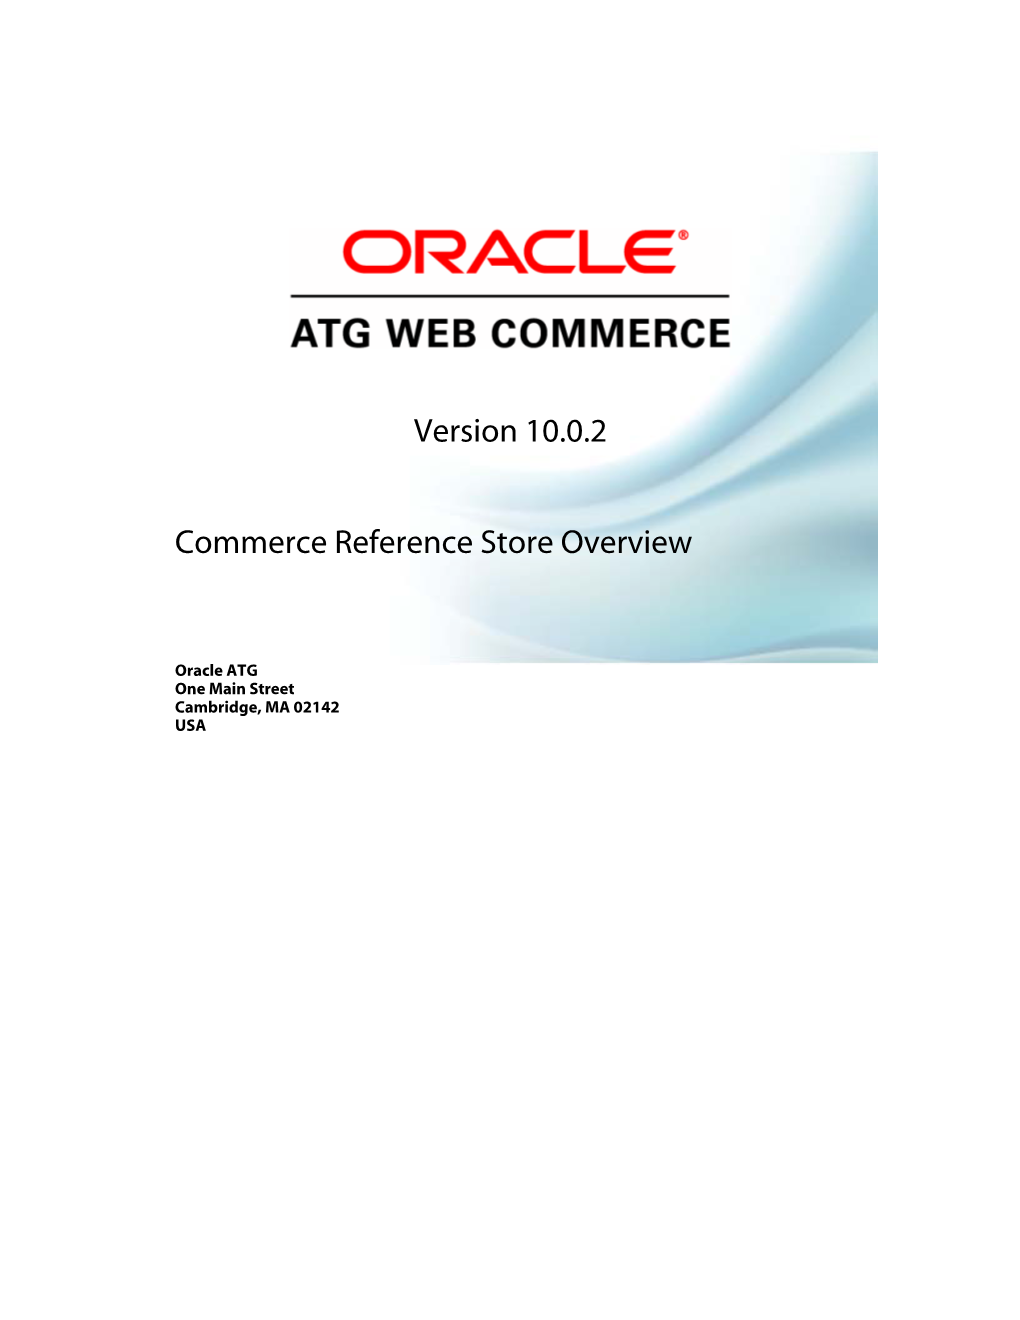 ATG 10.0.2 Commerce Reference Store Overview Guide